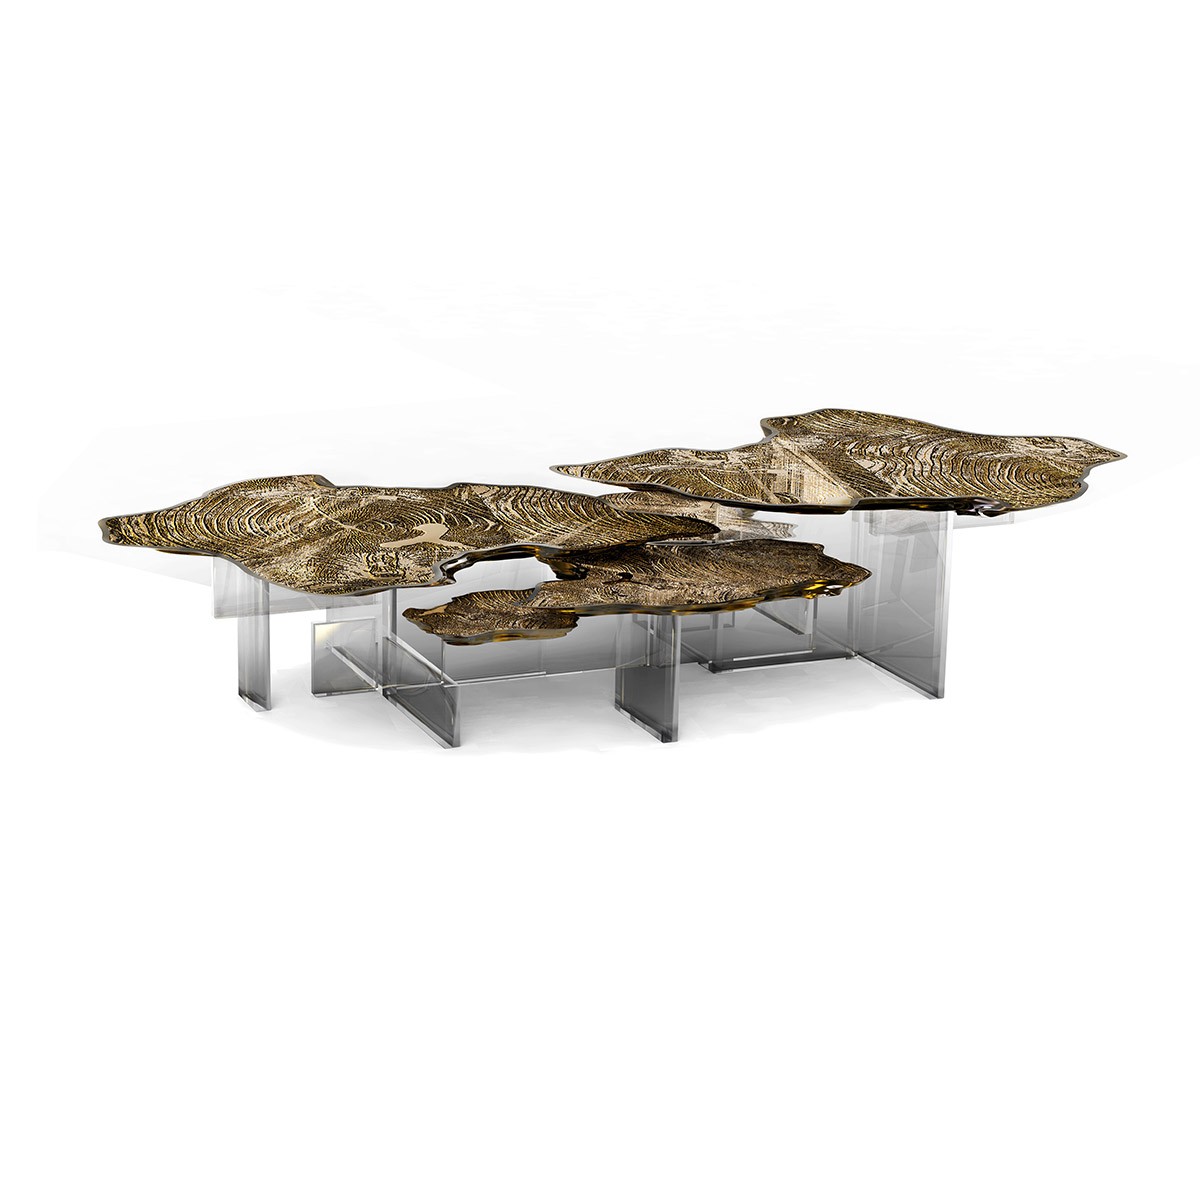 When Design Goes The Extra Mile: A Luxury Center Table By Boca do Lobo